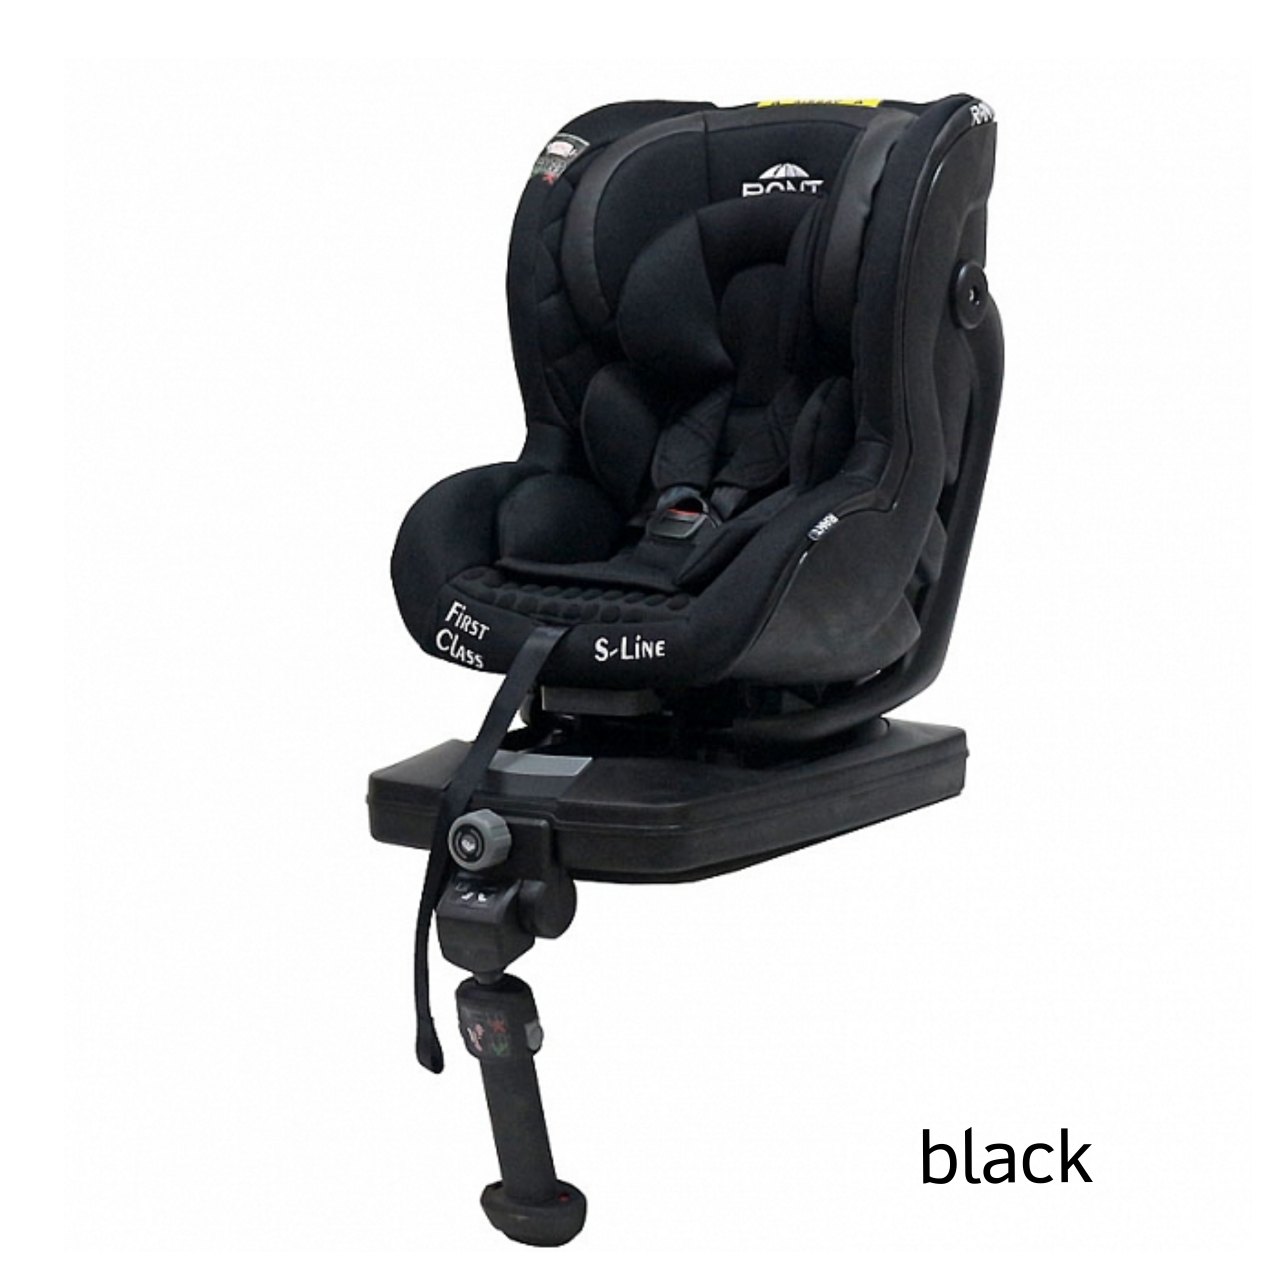 Rant first class s-line Isofix